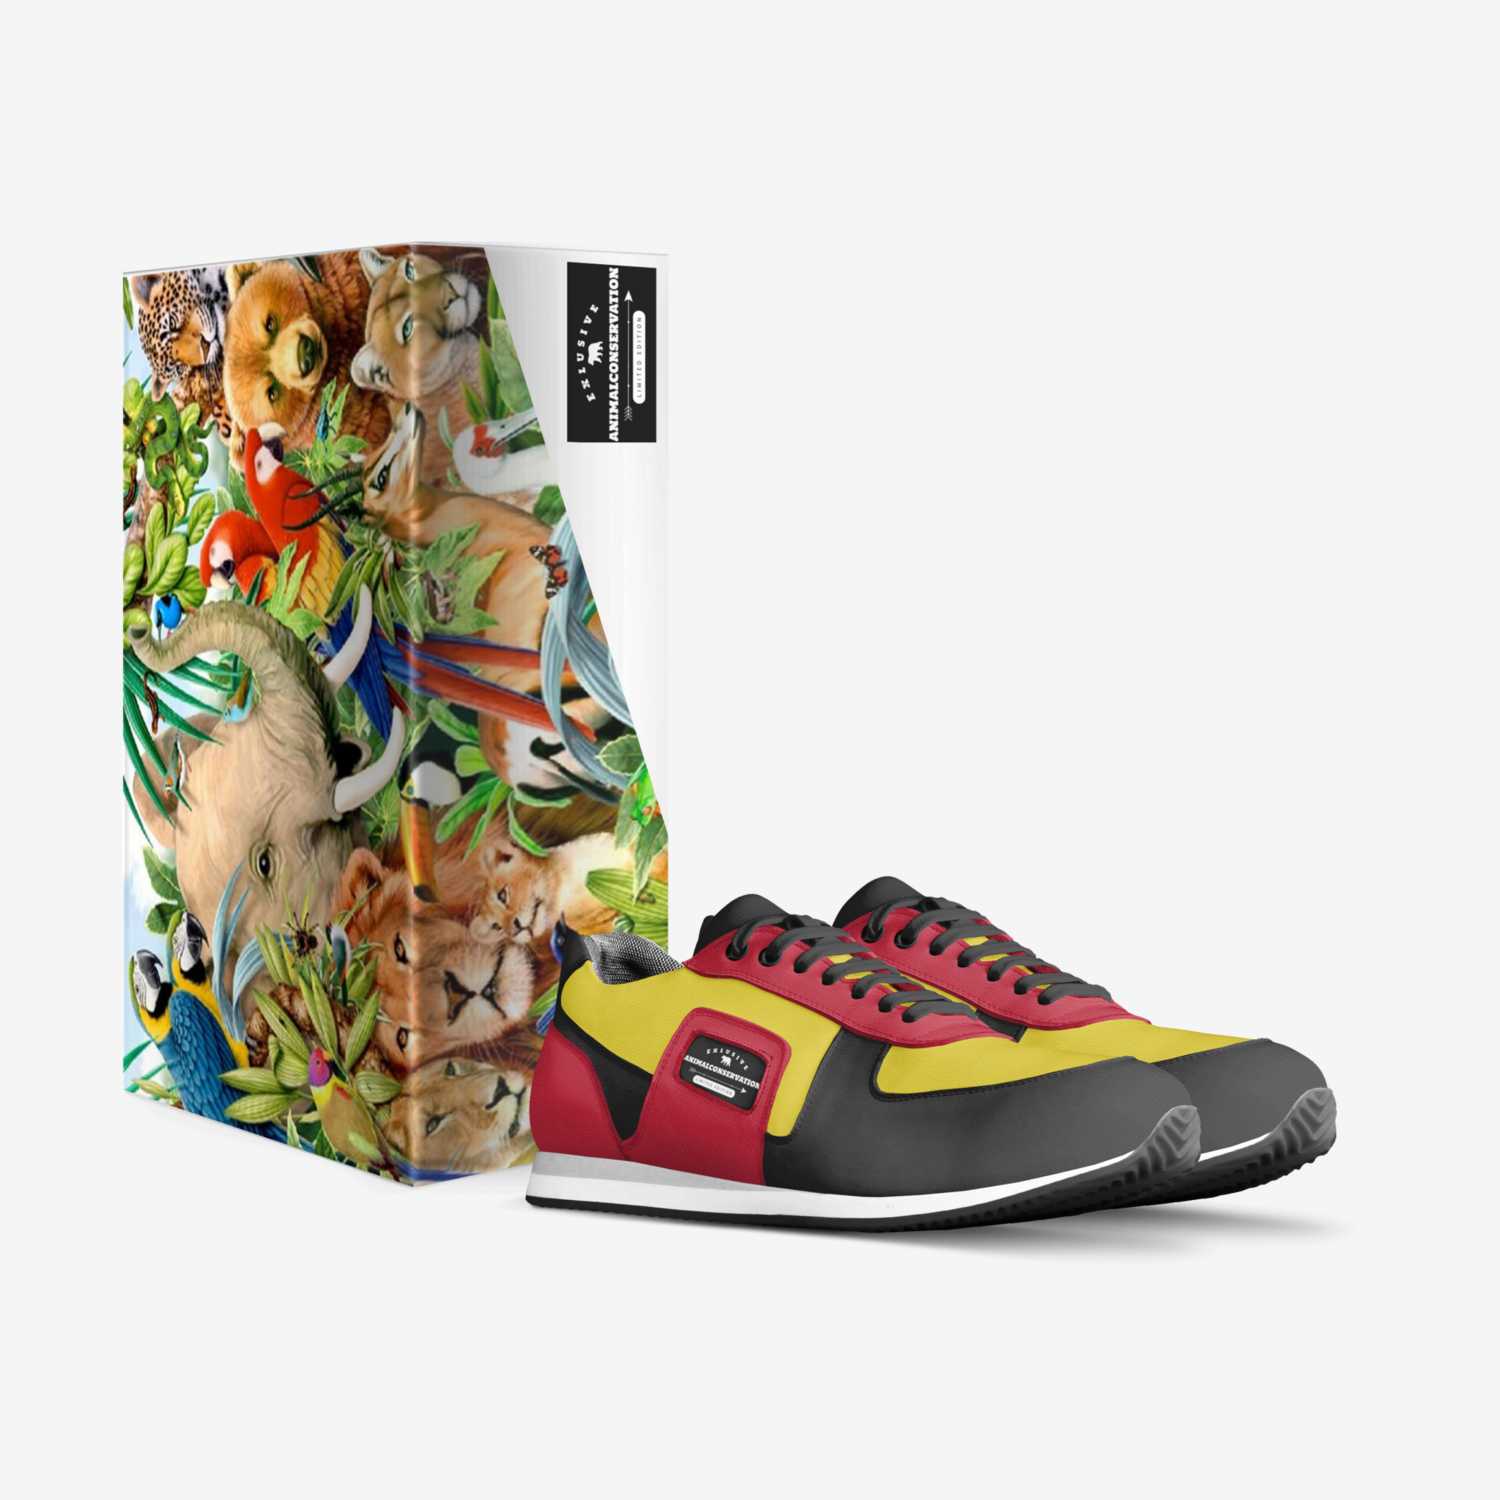 AnimalConservation custom made in Italy shoes by Michael Howell | Box view